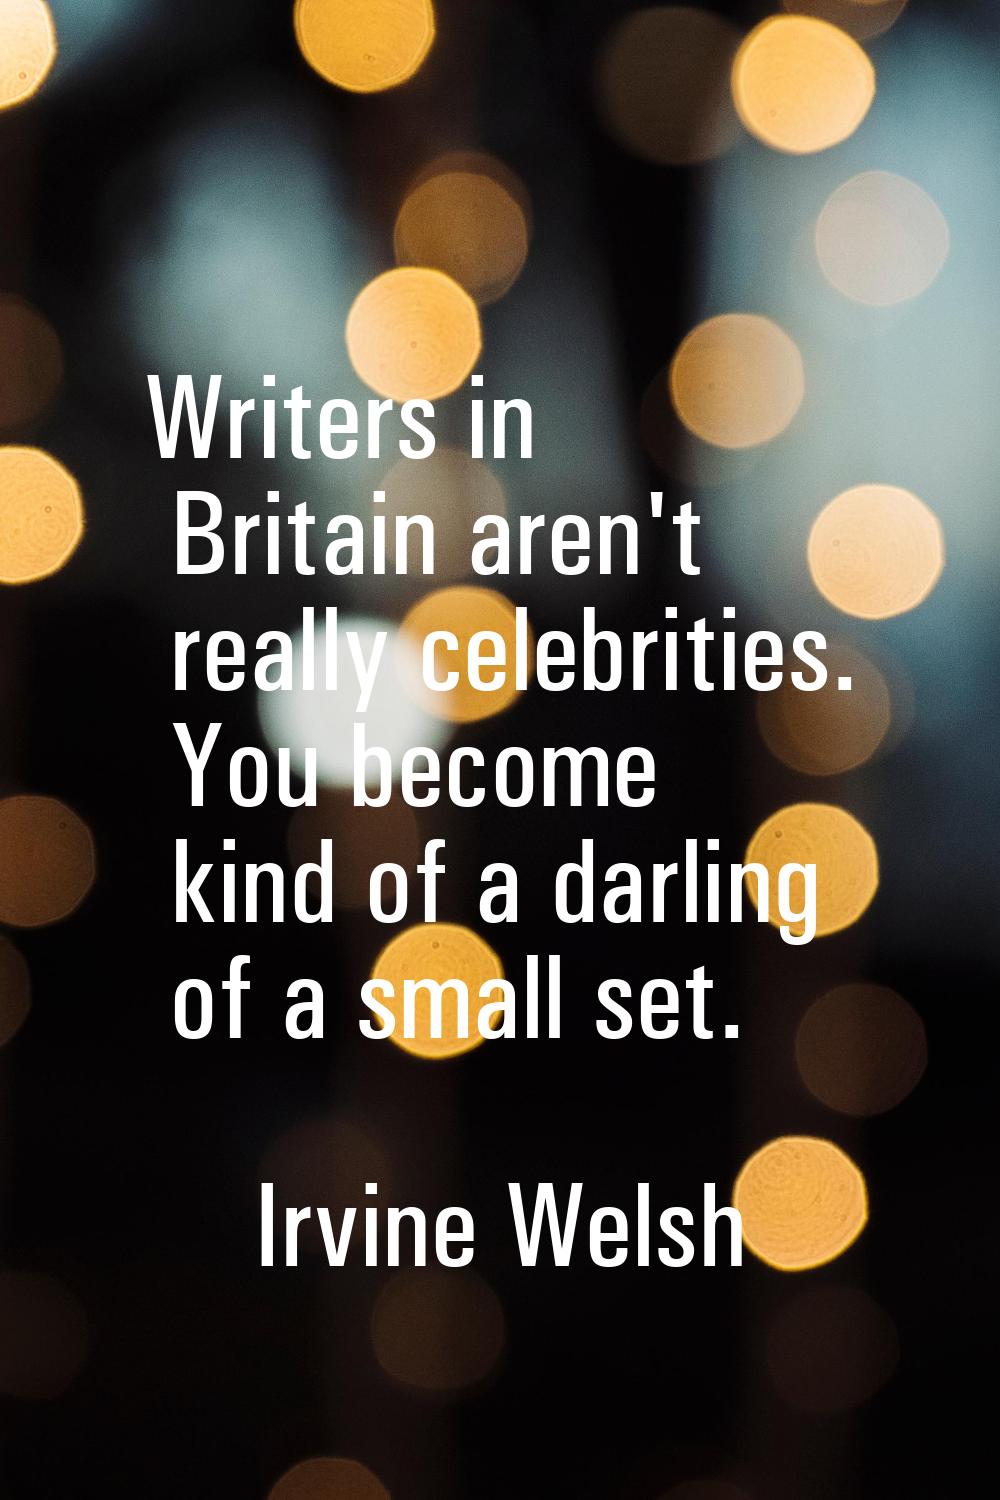 Writers in Britain aren't really celebrities. You become kind of a darling of a small set.